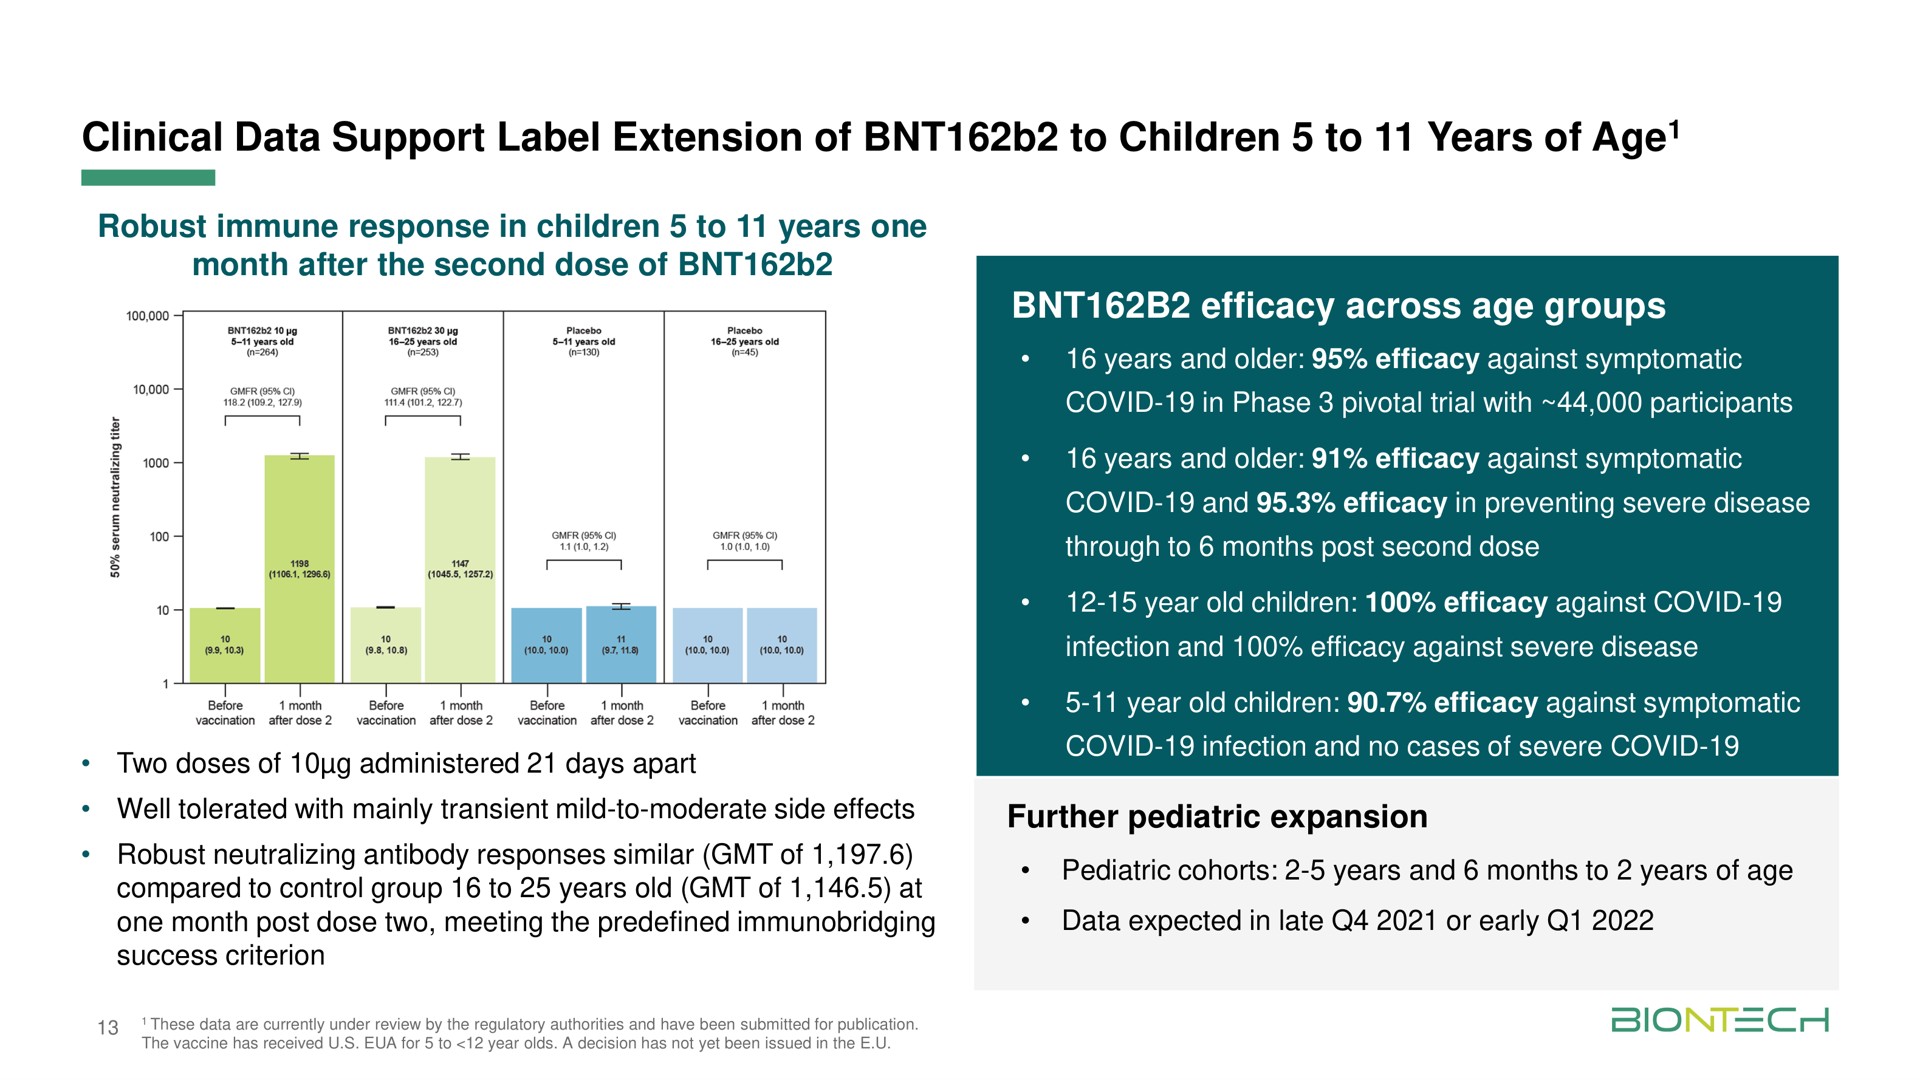 clinical data support label extension of to children to years of age efficacy across age groups | BioNTech